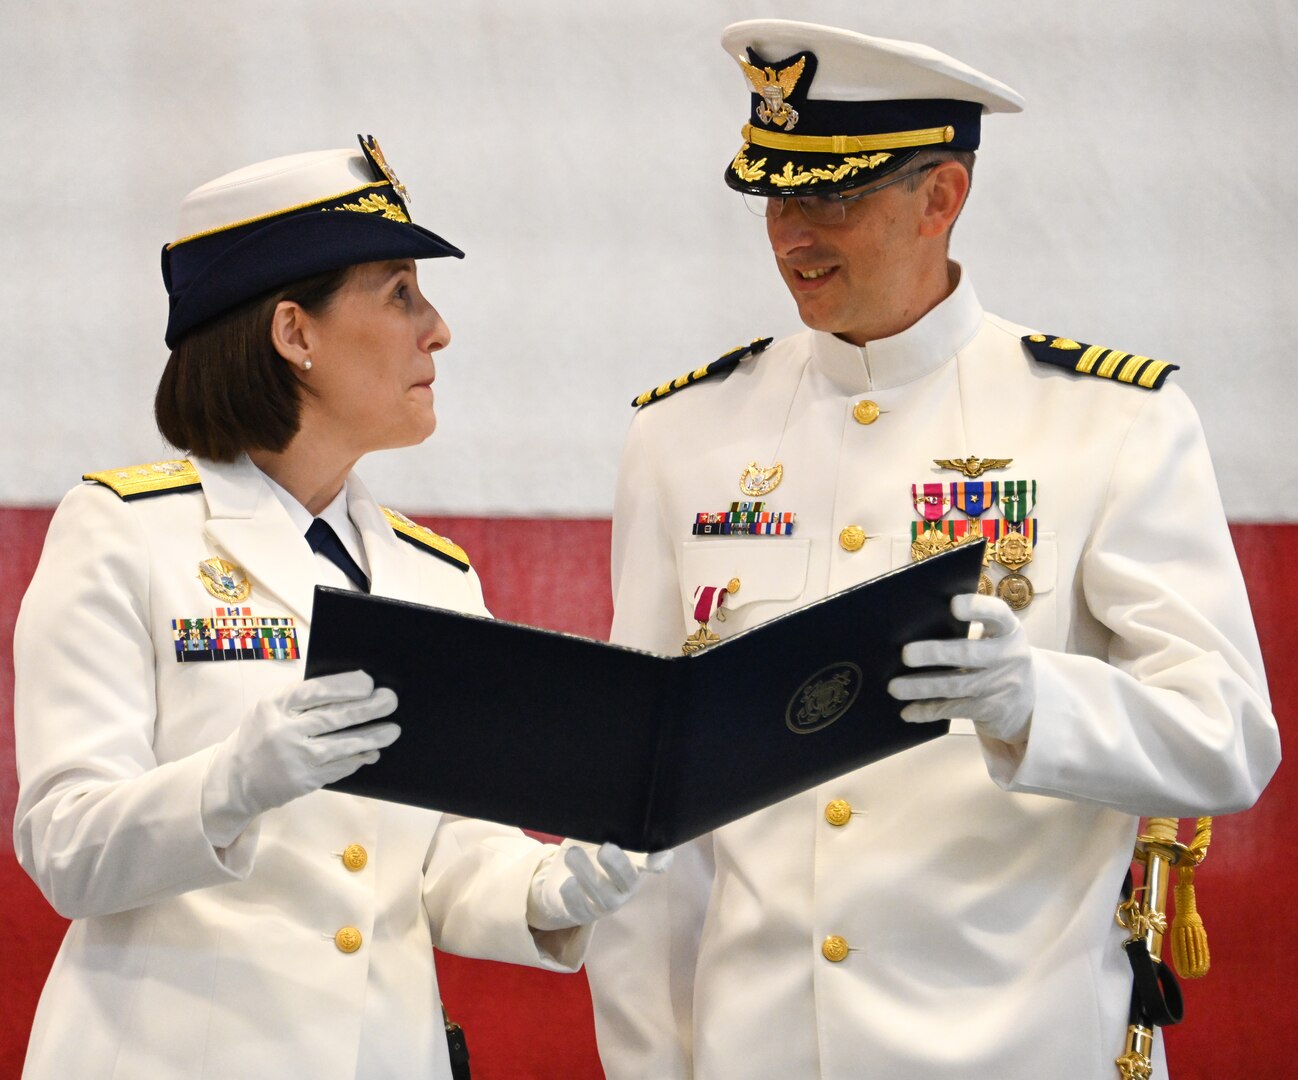 U.S. Coast Guard Rear Adm. Megan Dean, Seventeenth district commander, presents Capt. Nathan Coulter with a certificate of appreciation following Coulter’s retirement ceremony, June 22, 2023. Coulter retired from the Coast Guard after serving 26 years in the service. U.S. Coast Guard photo by Petty Officer 3rd Class Ian Gray.